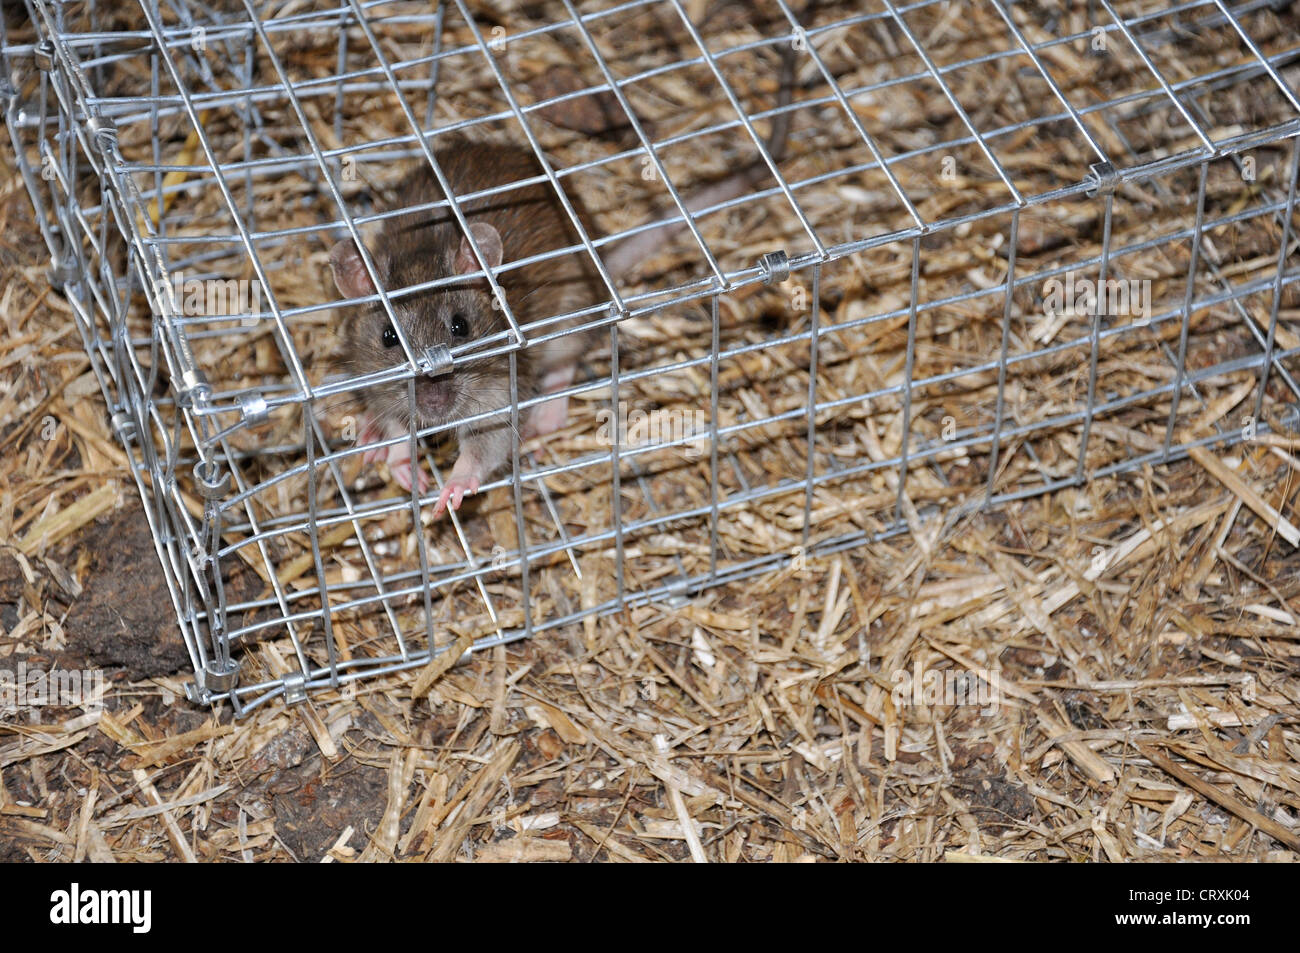 https://c8.alamy.com/comp/CRXK04/rat-trapped-in-a-wire-live-cage-trap-CRXK04.jpg